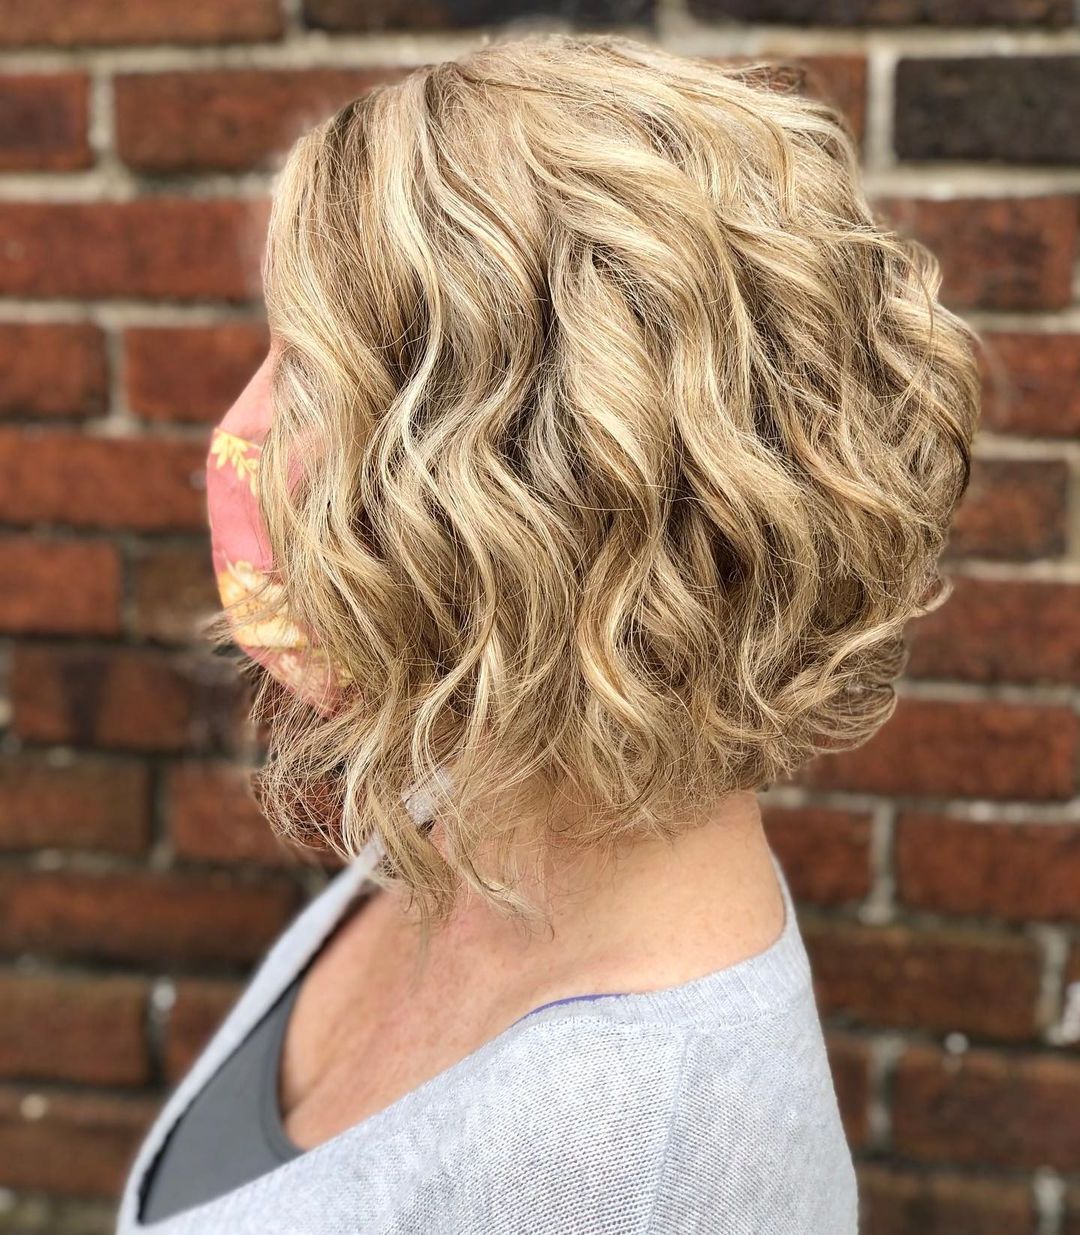 64 Most Flattering Short Curly Hairstyles To Perfectly Shape Your Curls Inside Short Hairstyles With Loose Curls (View 6 of 20)